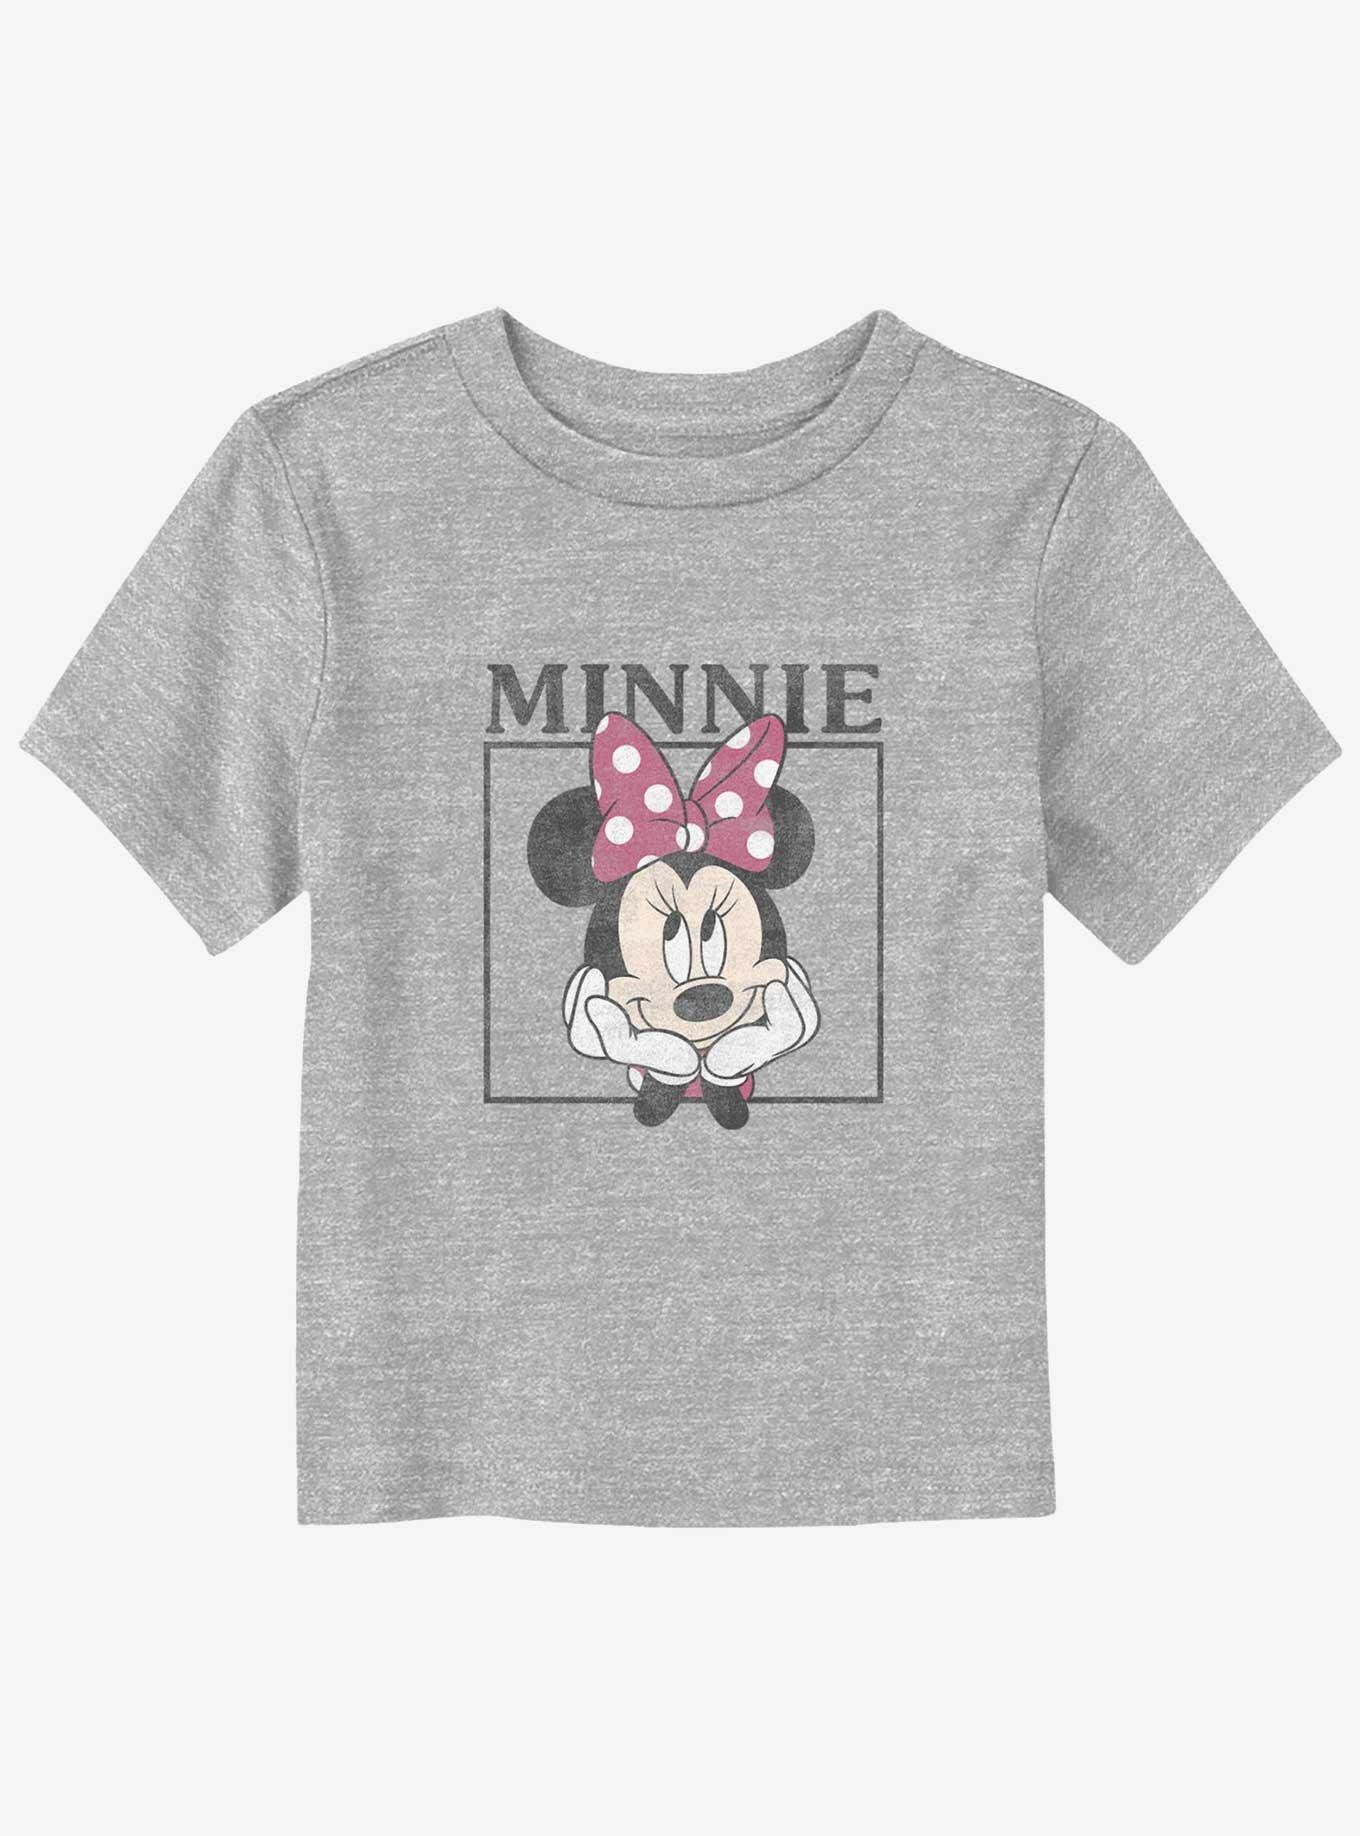 Disney Minnie Mouse Boxed Toddler T-Shirt, ATH HTR, hi-res